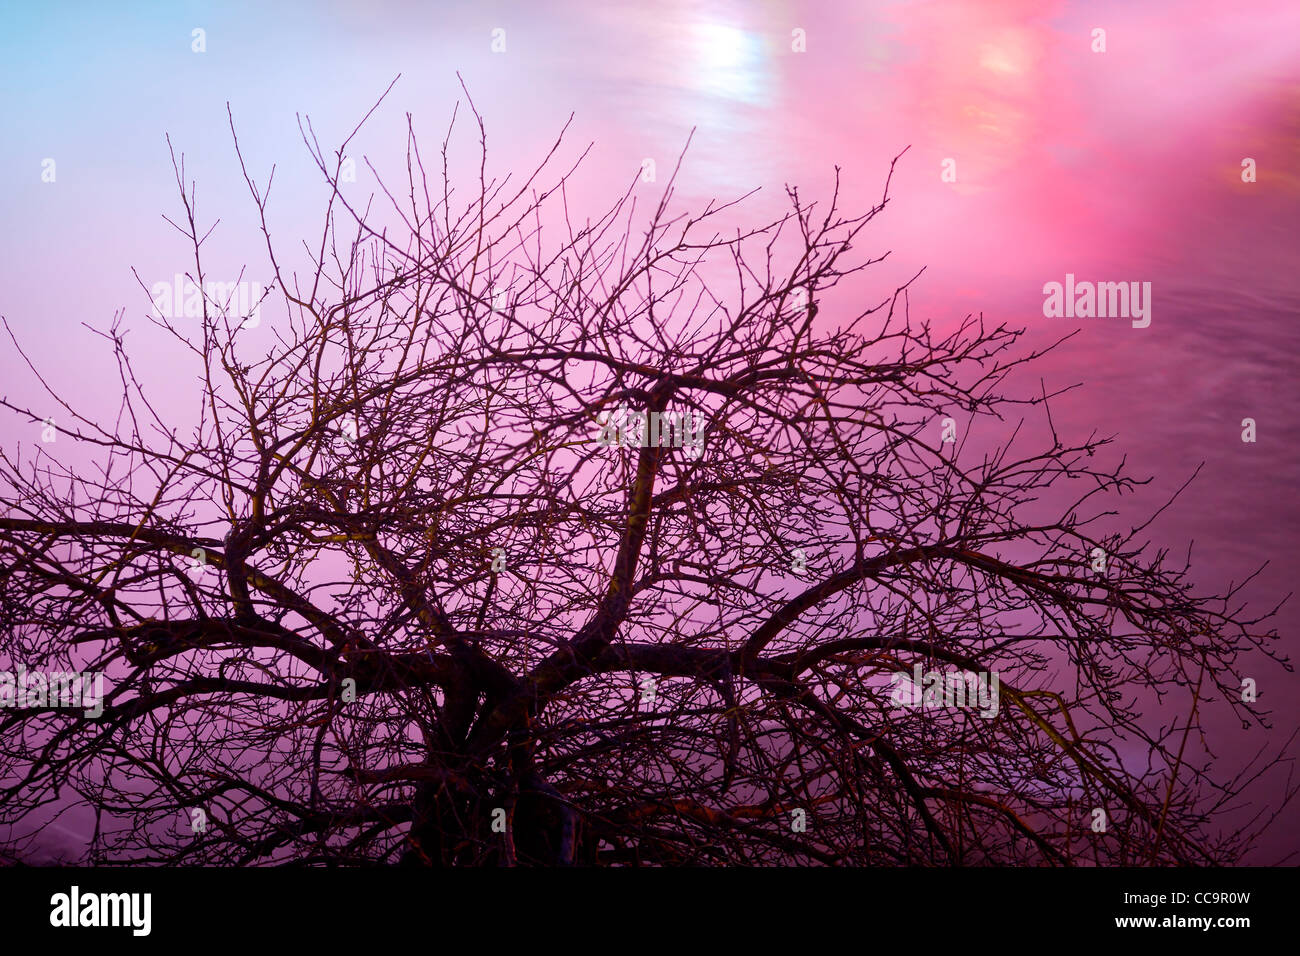 A tangle of branches and a colorful sky Stock Photo